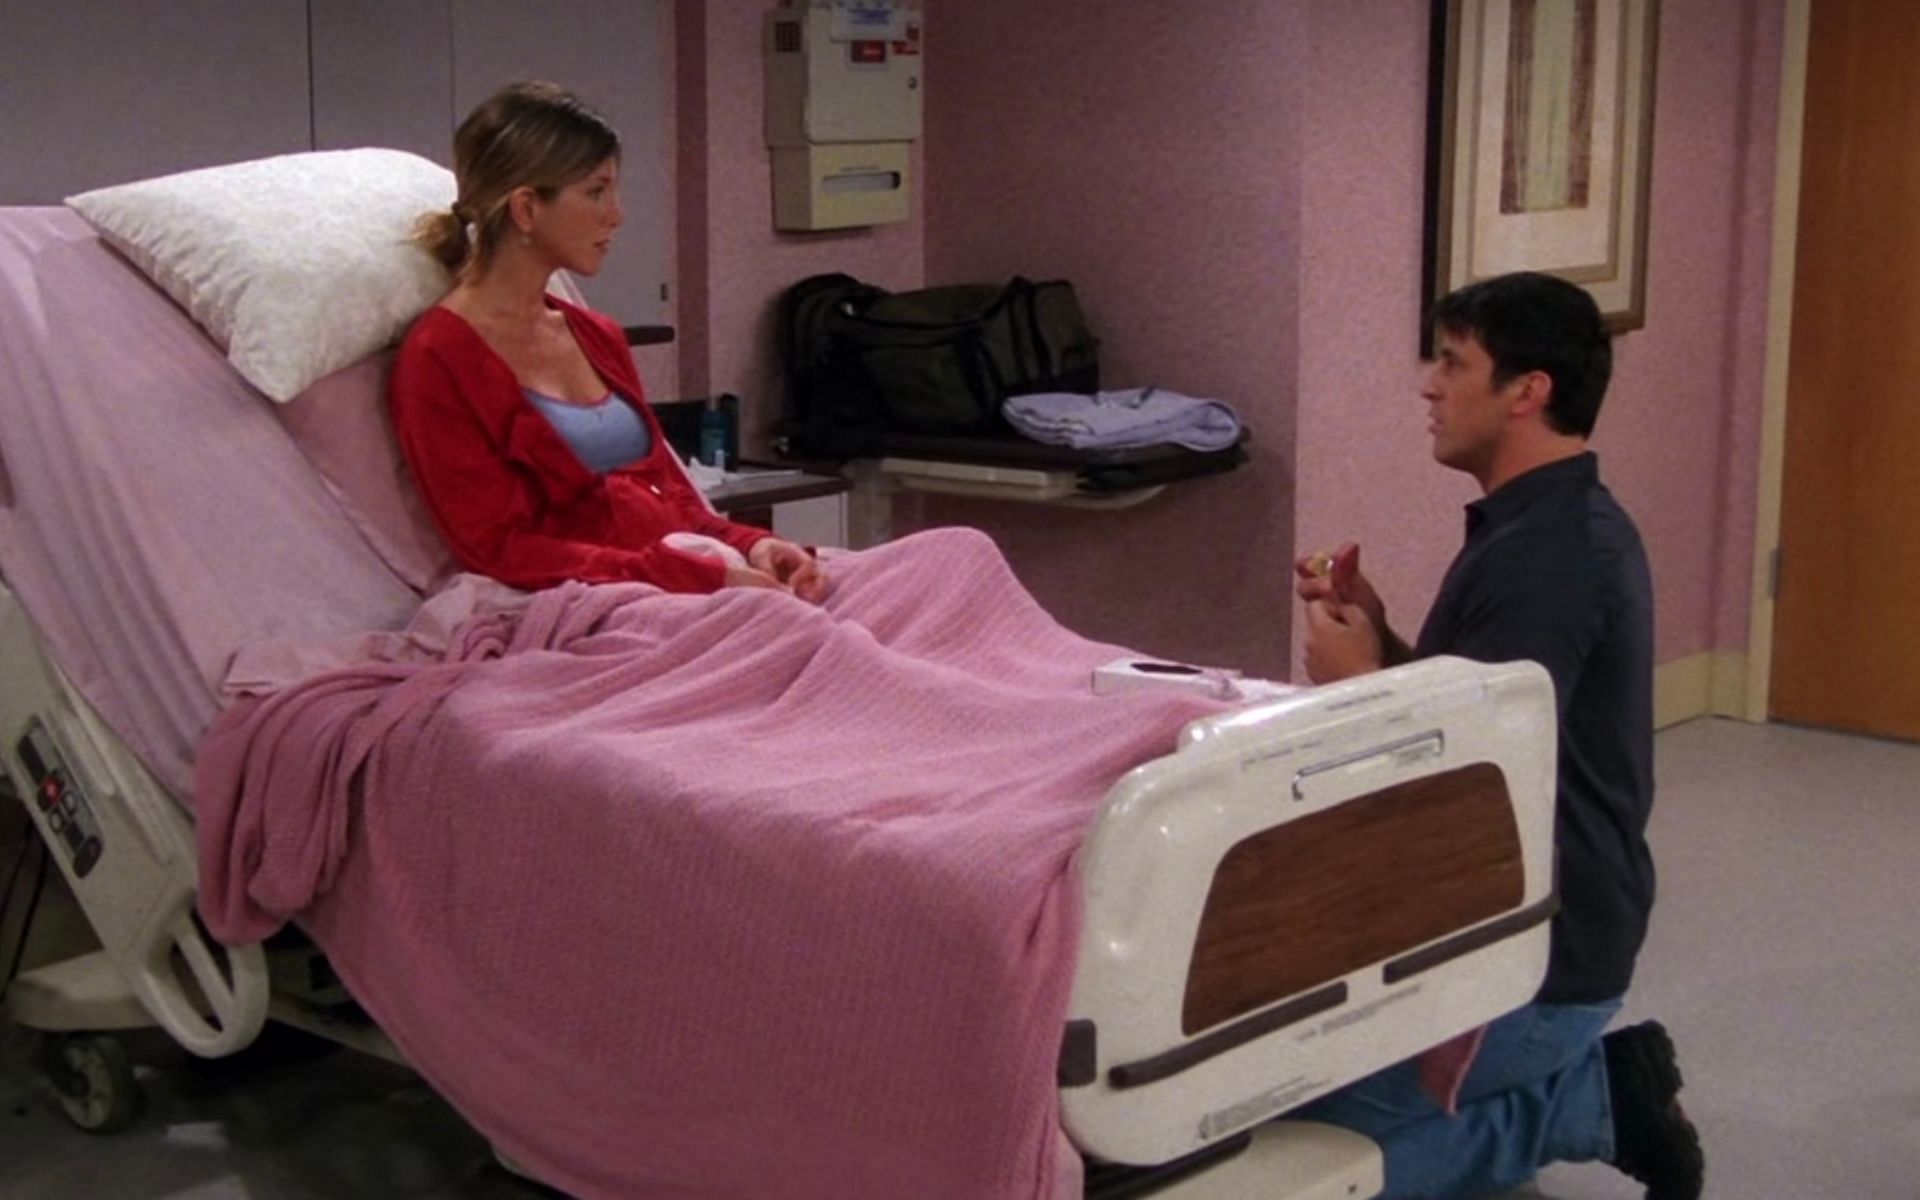 Joey unintentionally proposes to Rachel in this episode of Friends (Image via Warner Bros.)